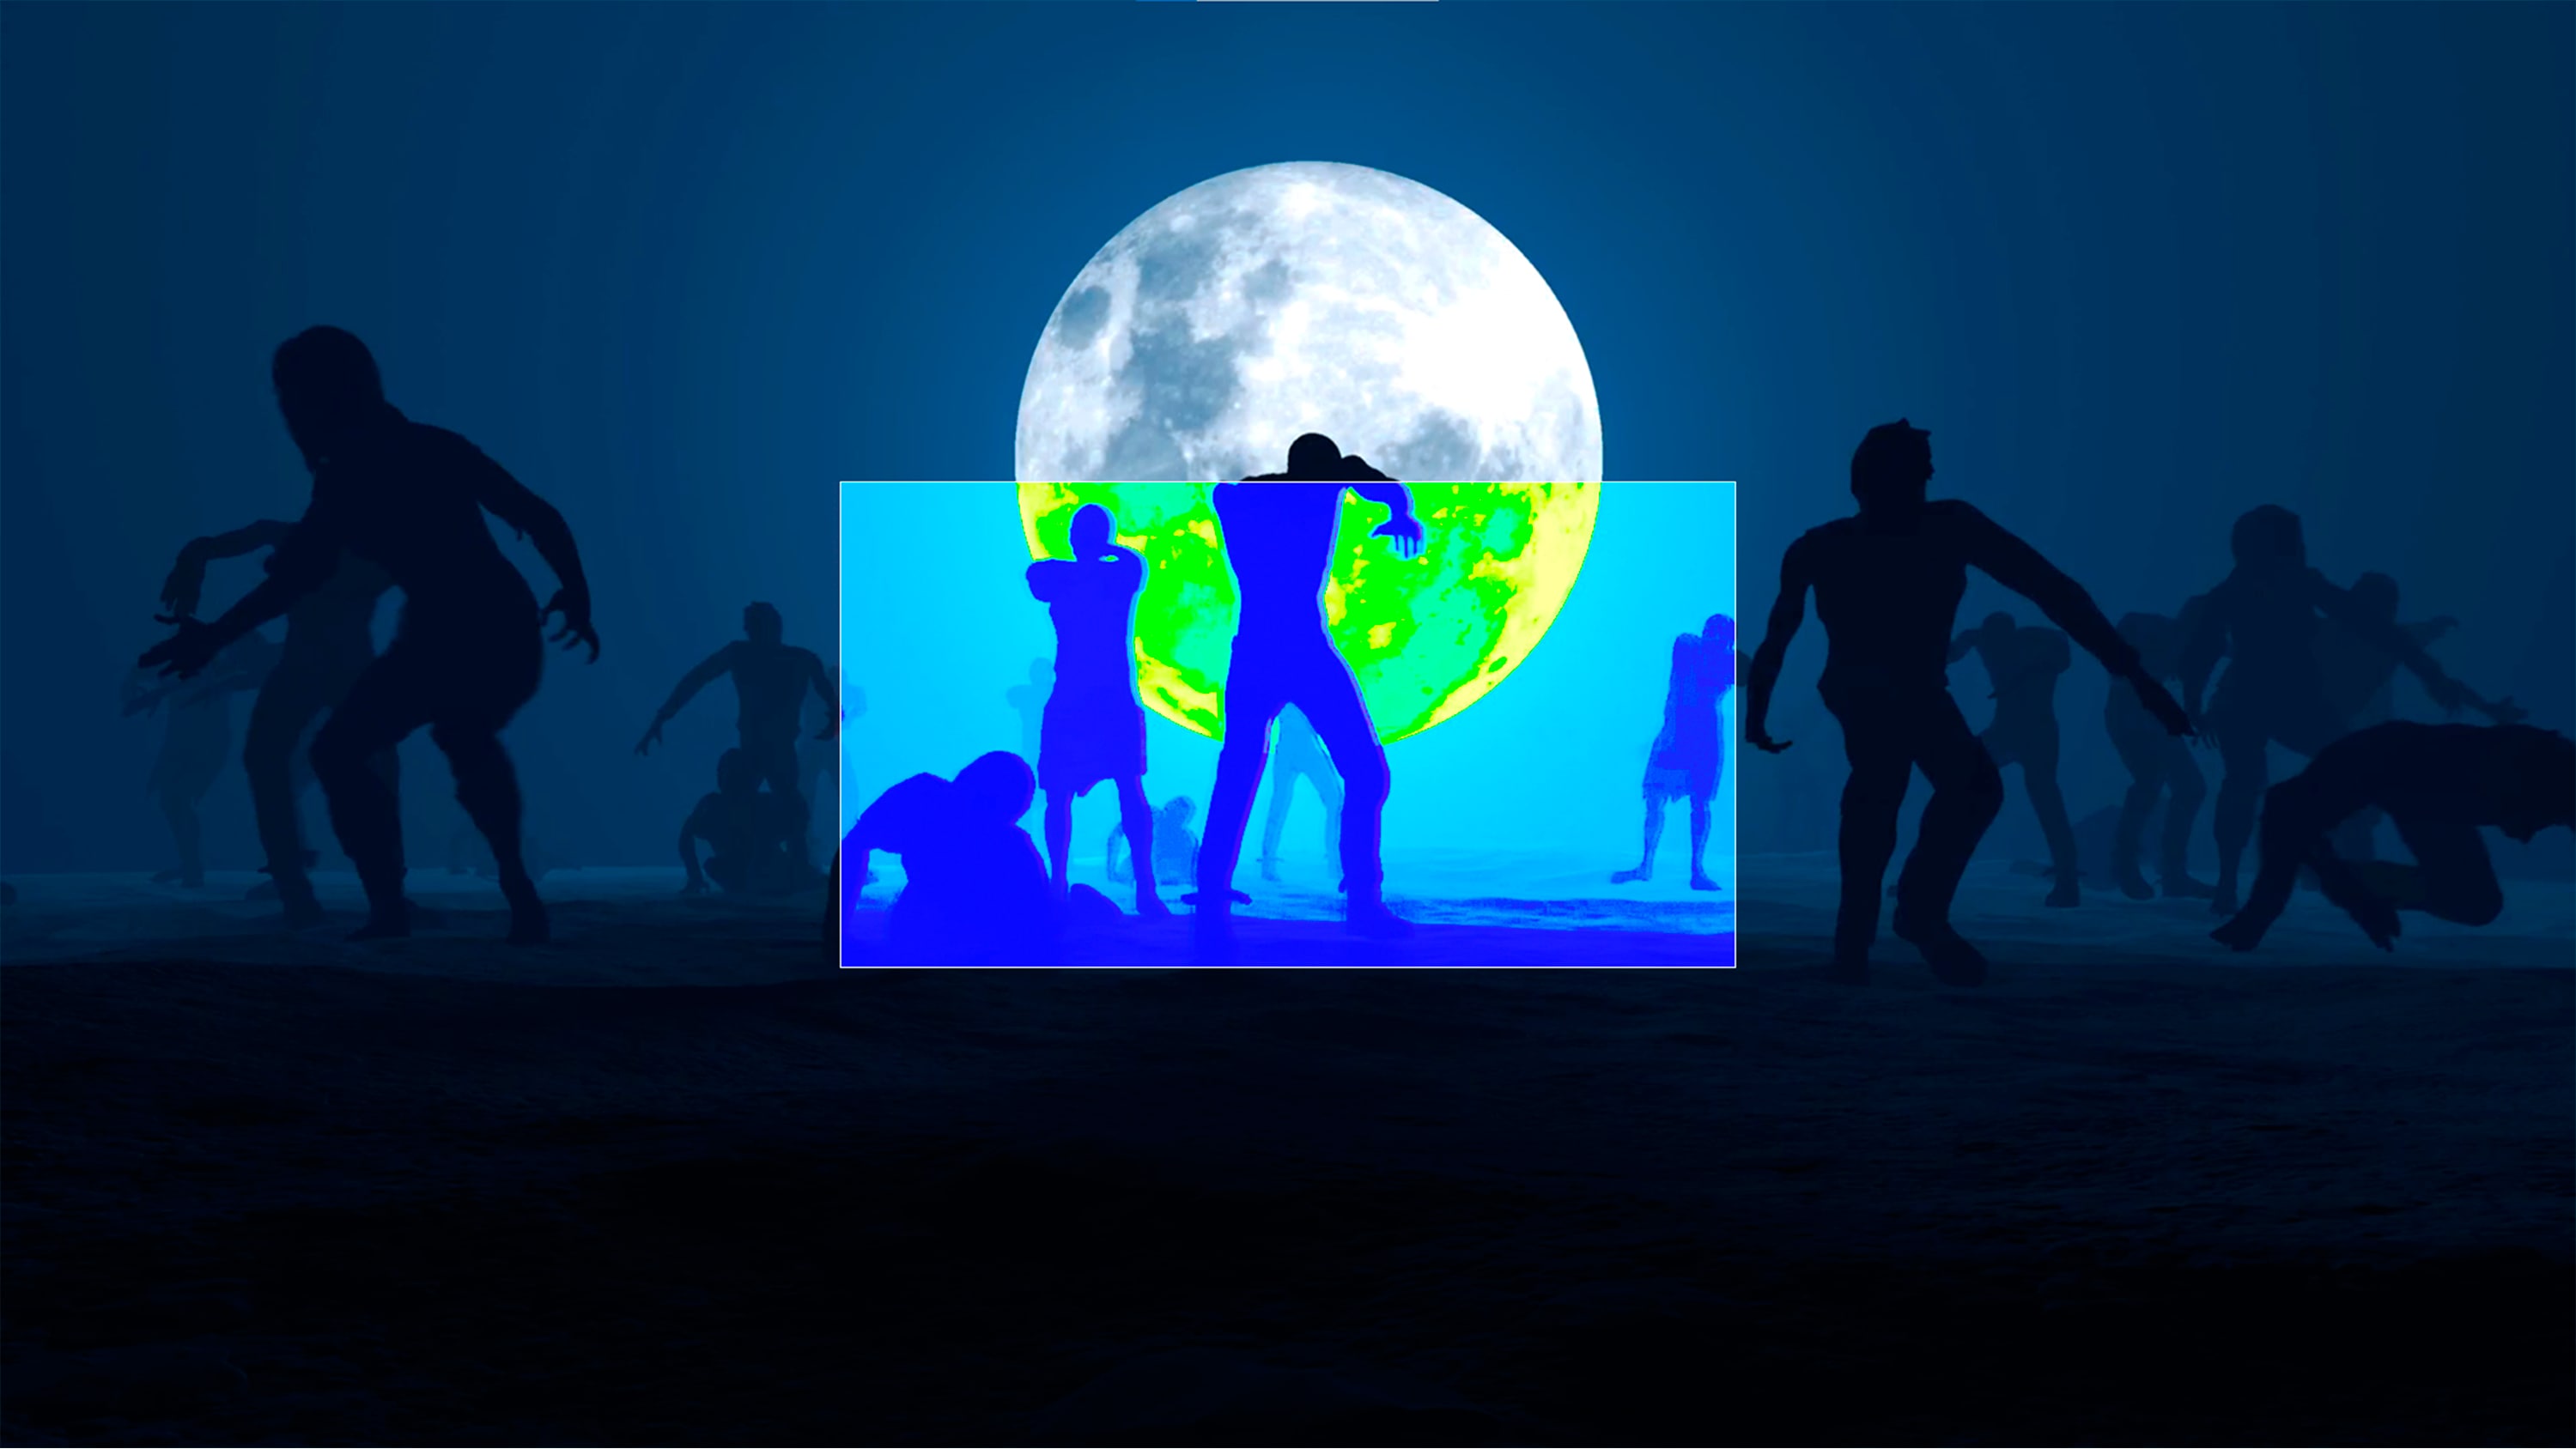 Game image of zombies in front of a full moon.